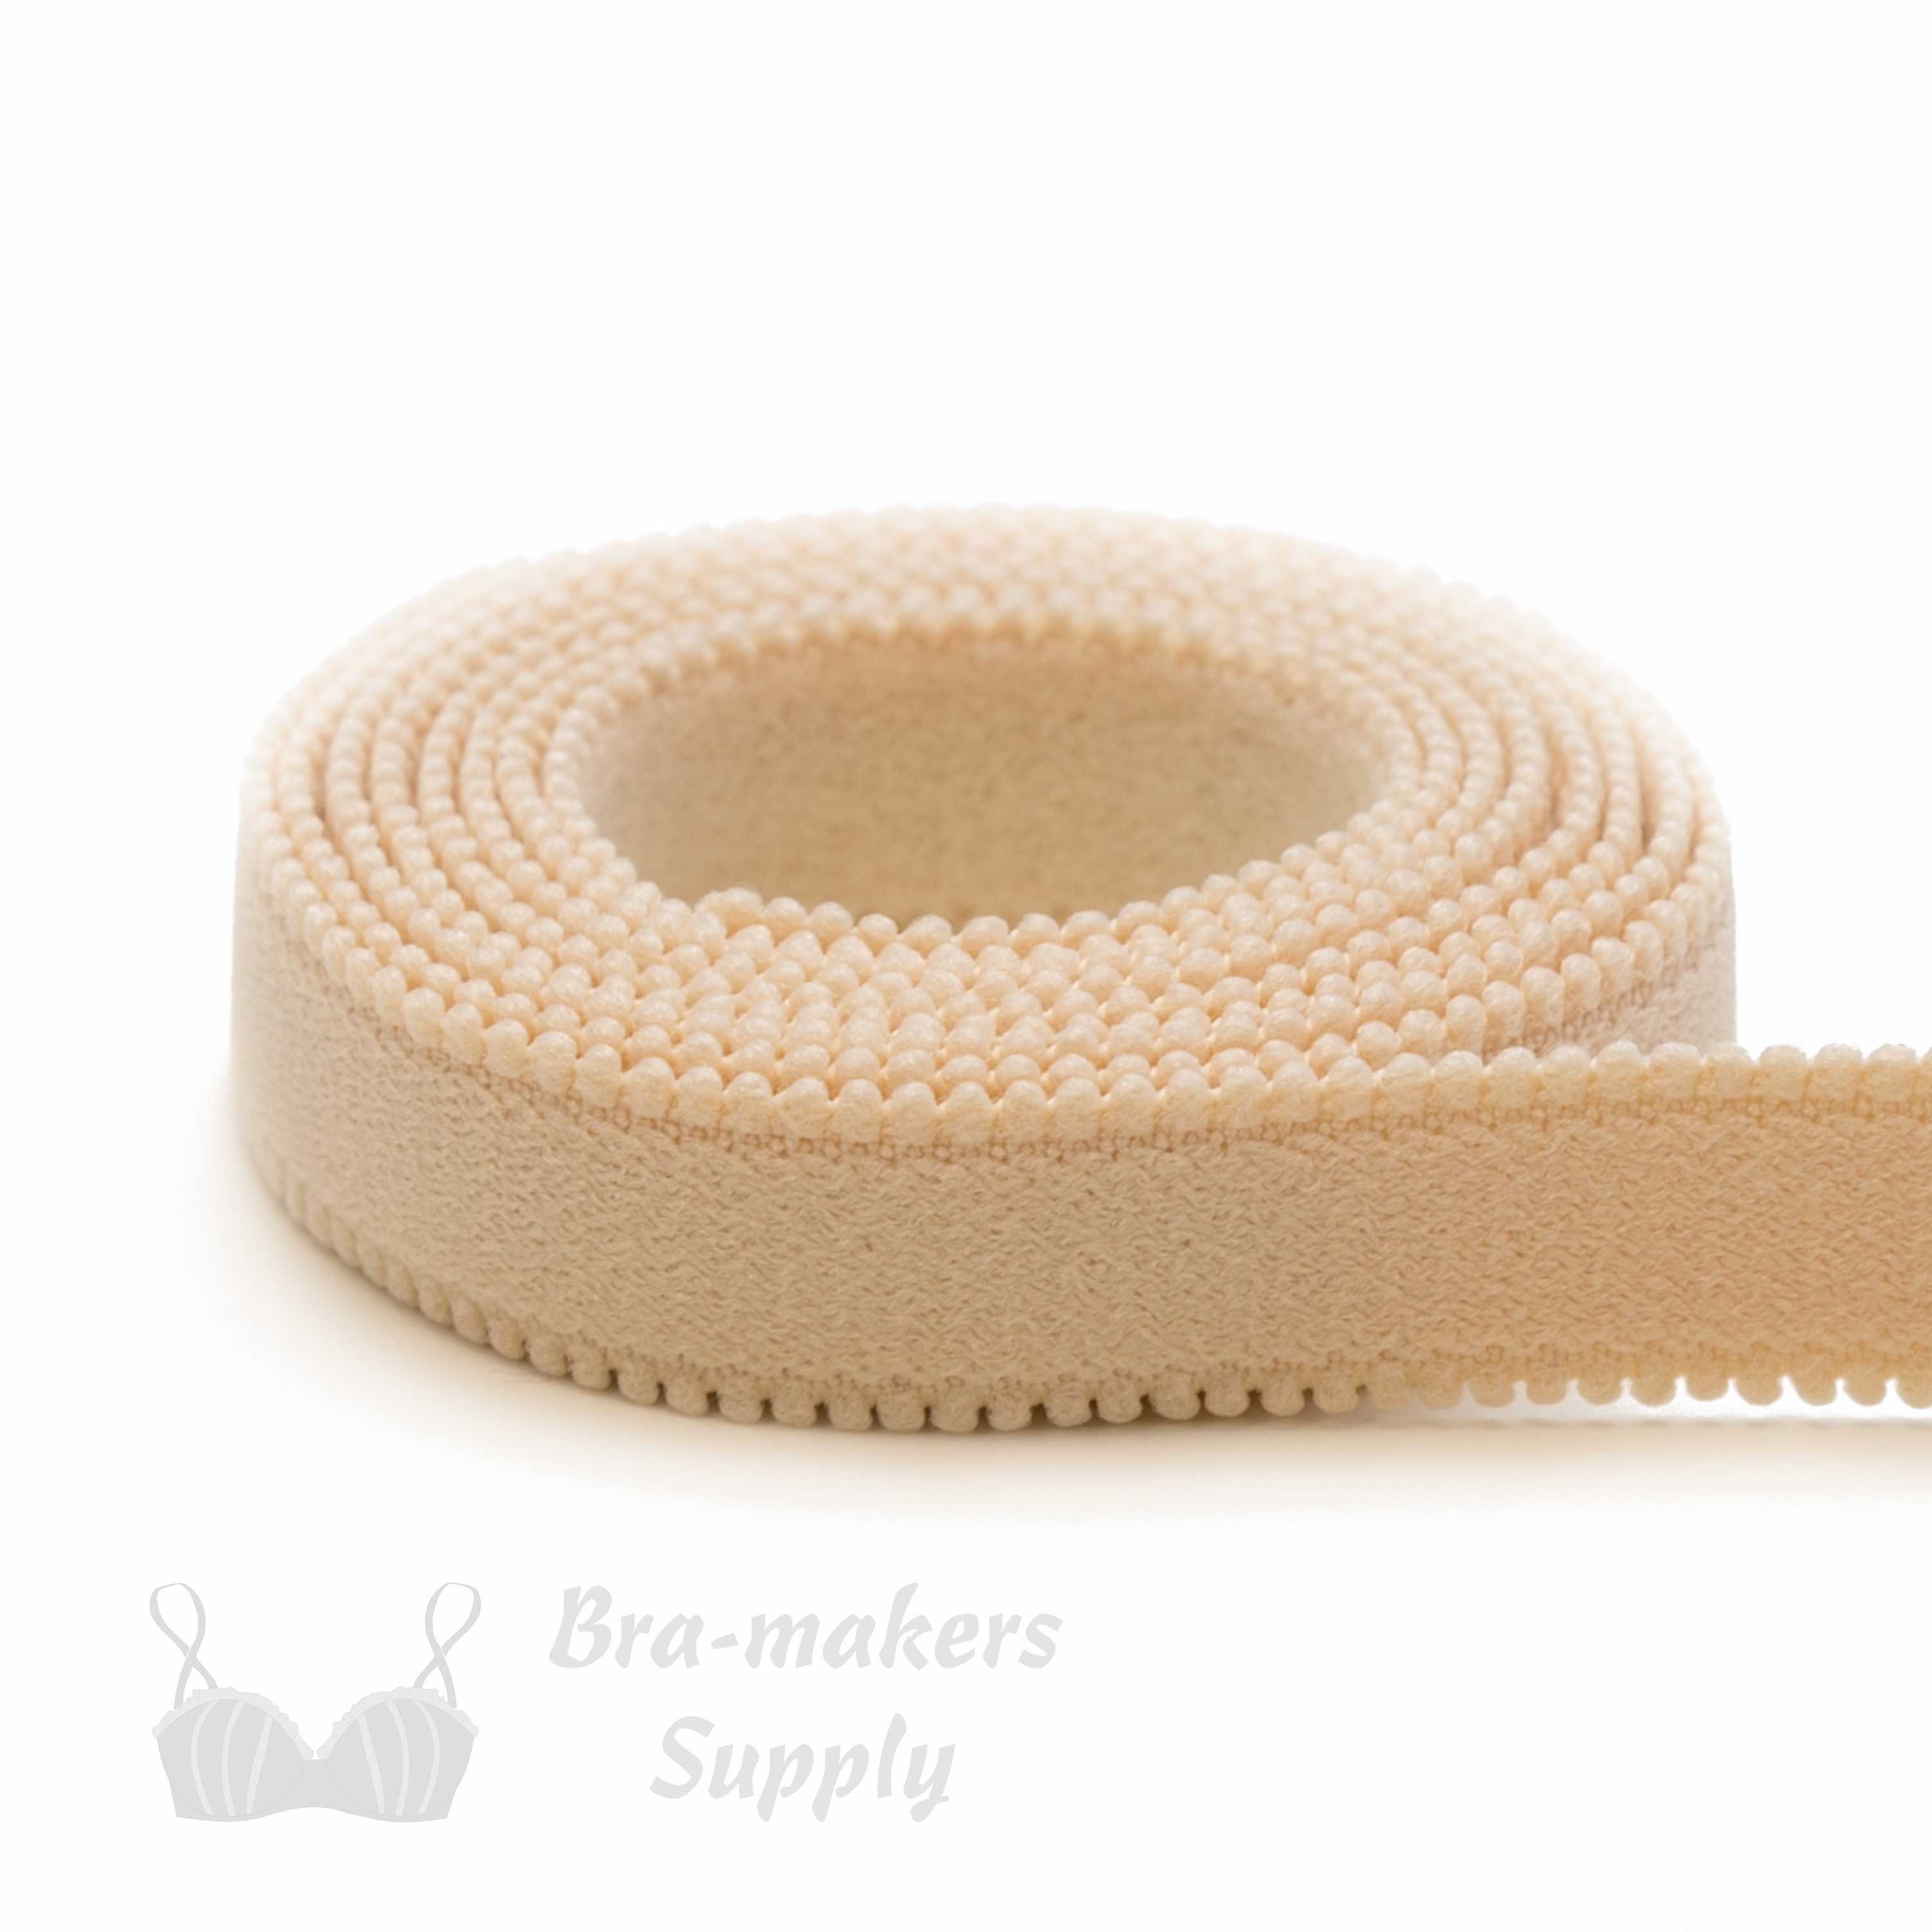 soft touch bra strap elastic ES-31 beige from Bra-Makers Supply 1 metre roll shown